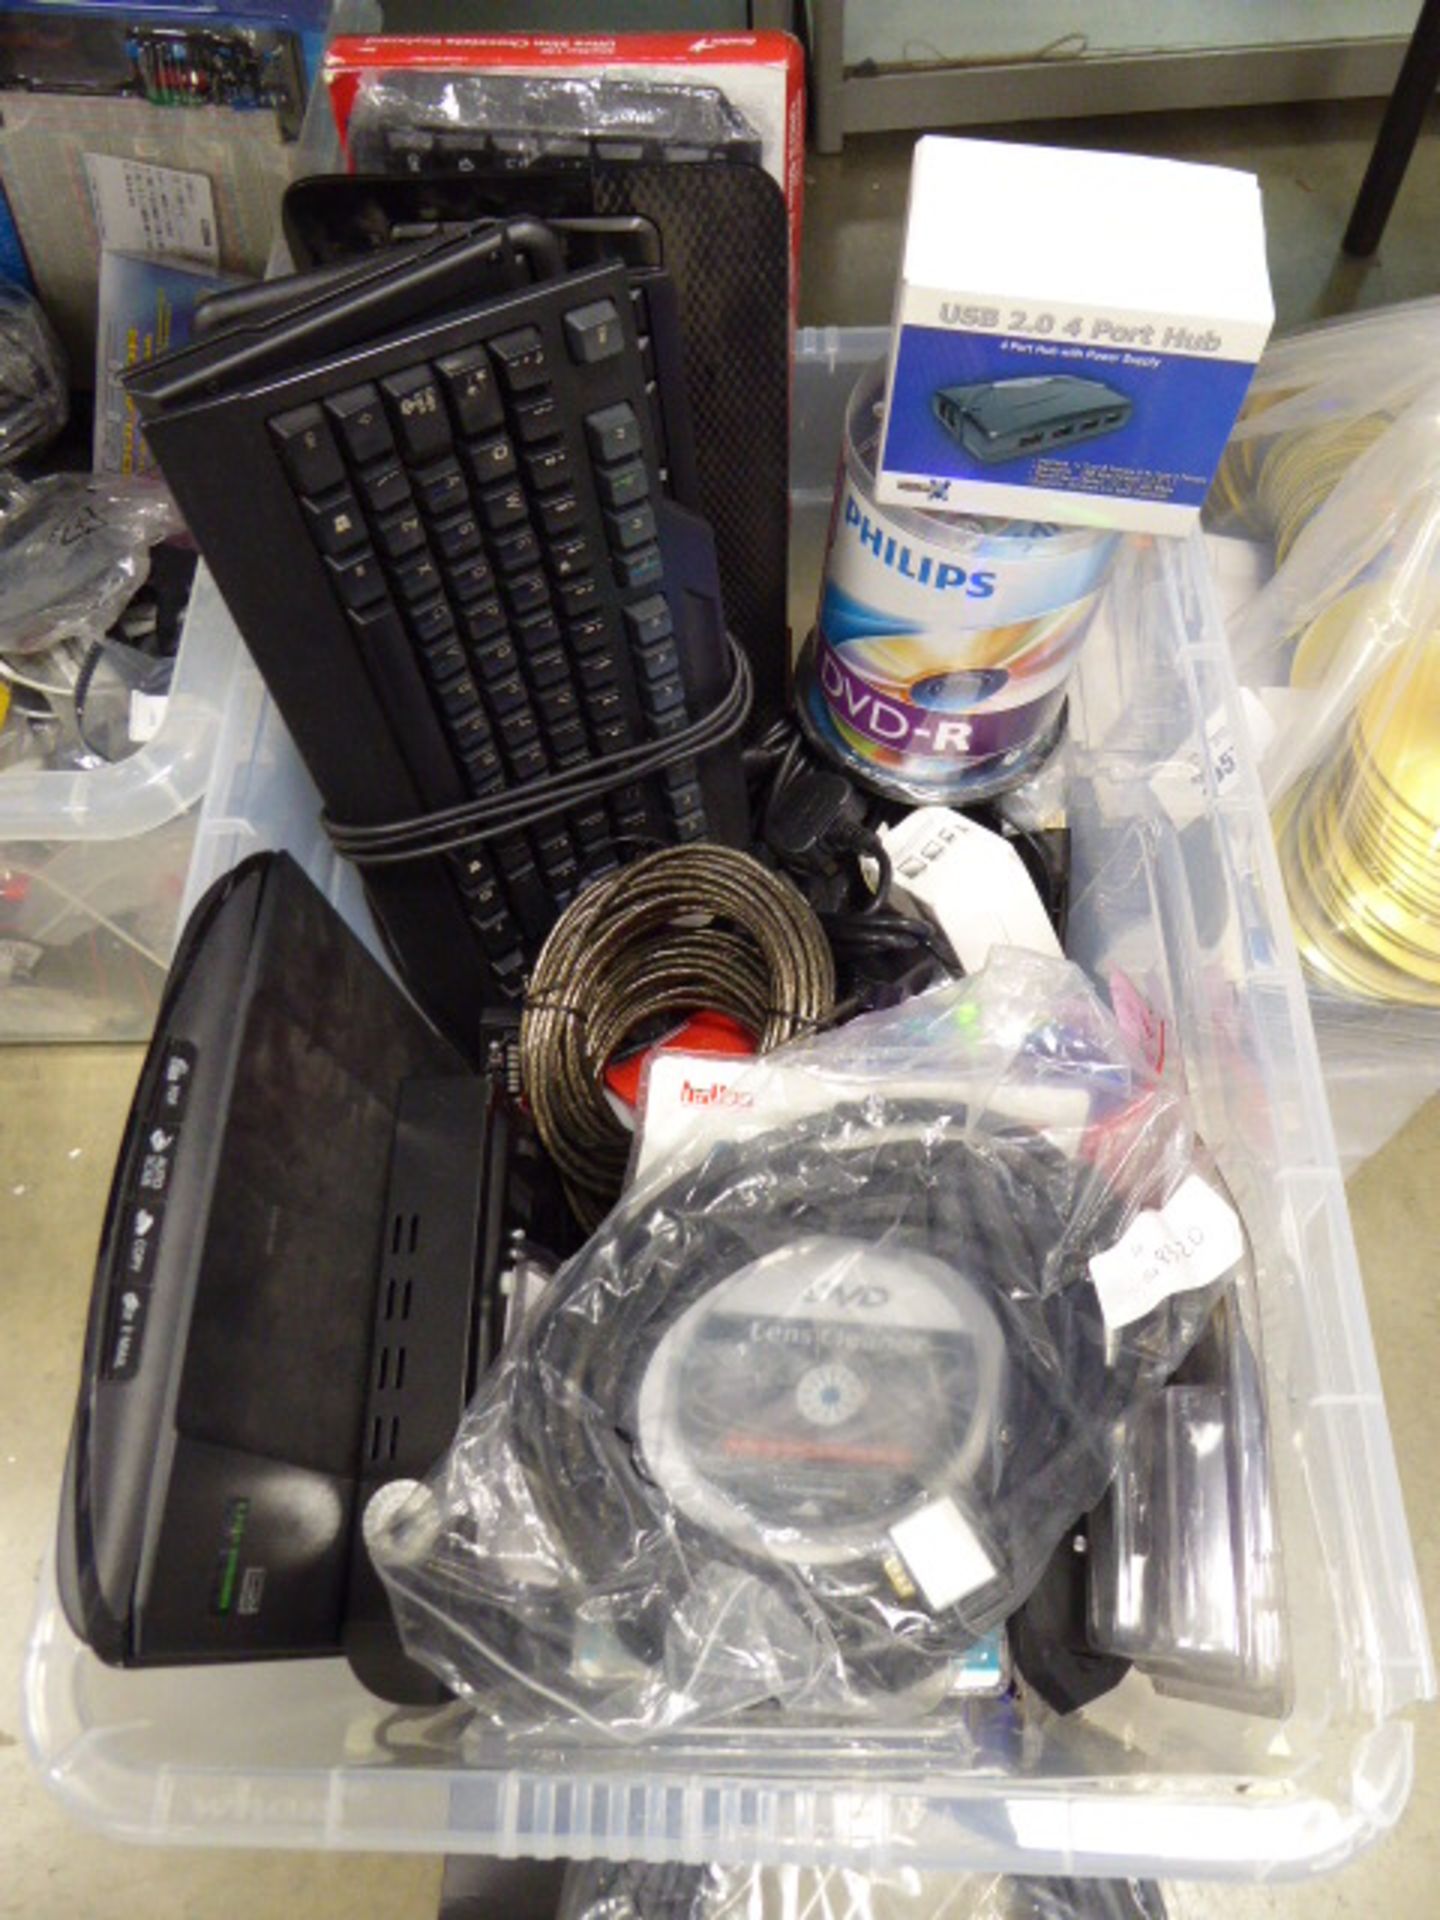 Box containing various PC keyboards, scanner, audio visual cables, HDMi VGA, DVD re writable discs